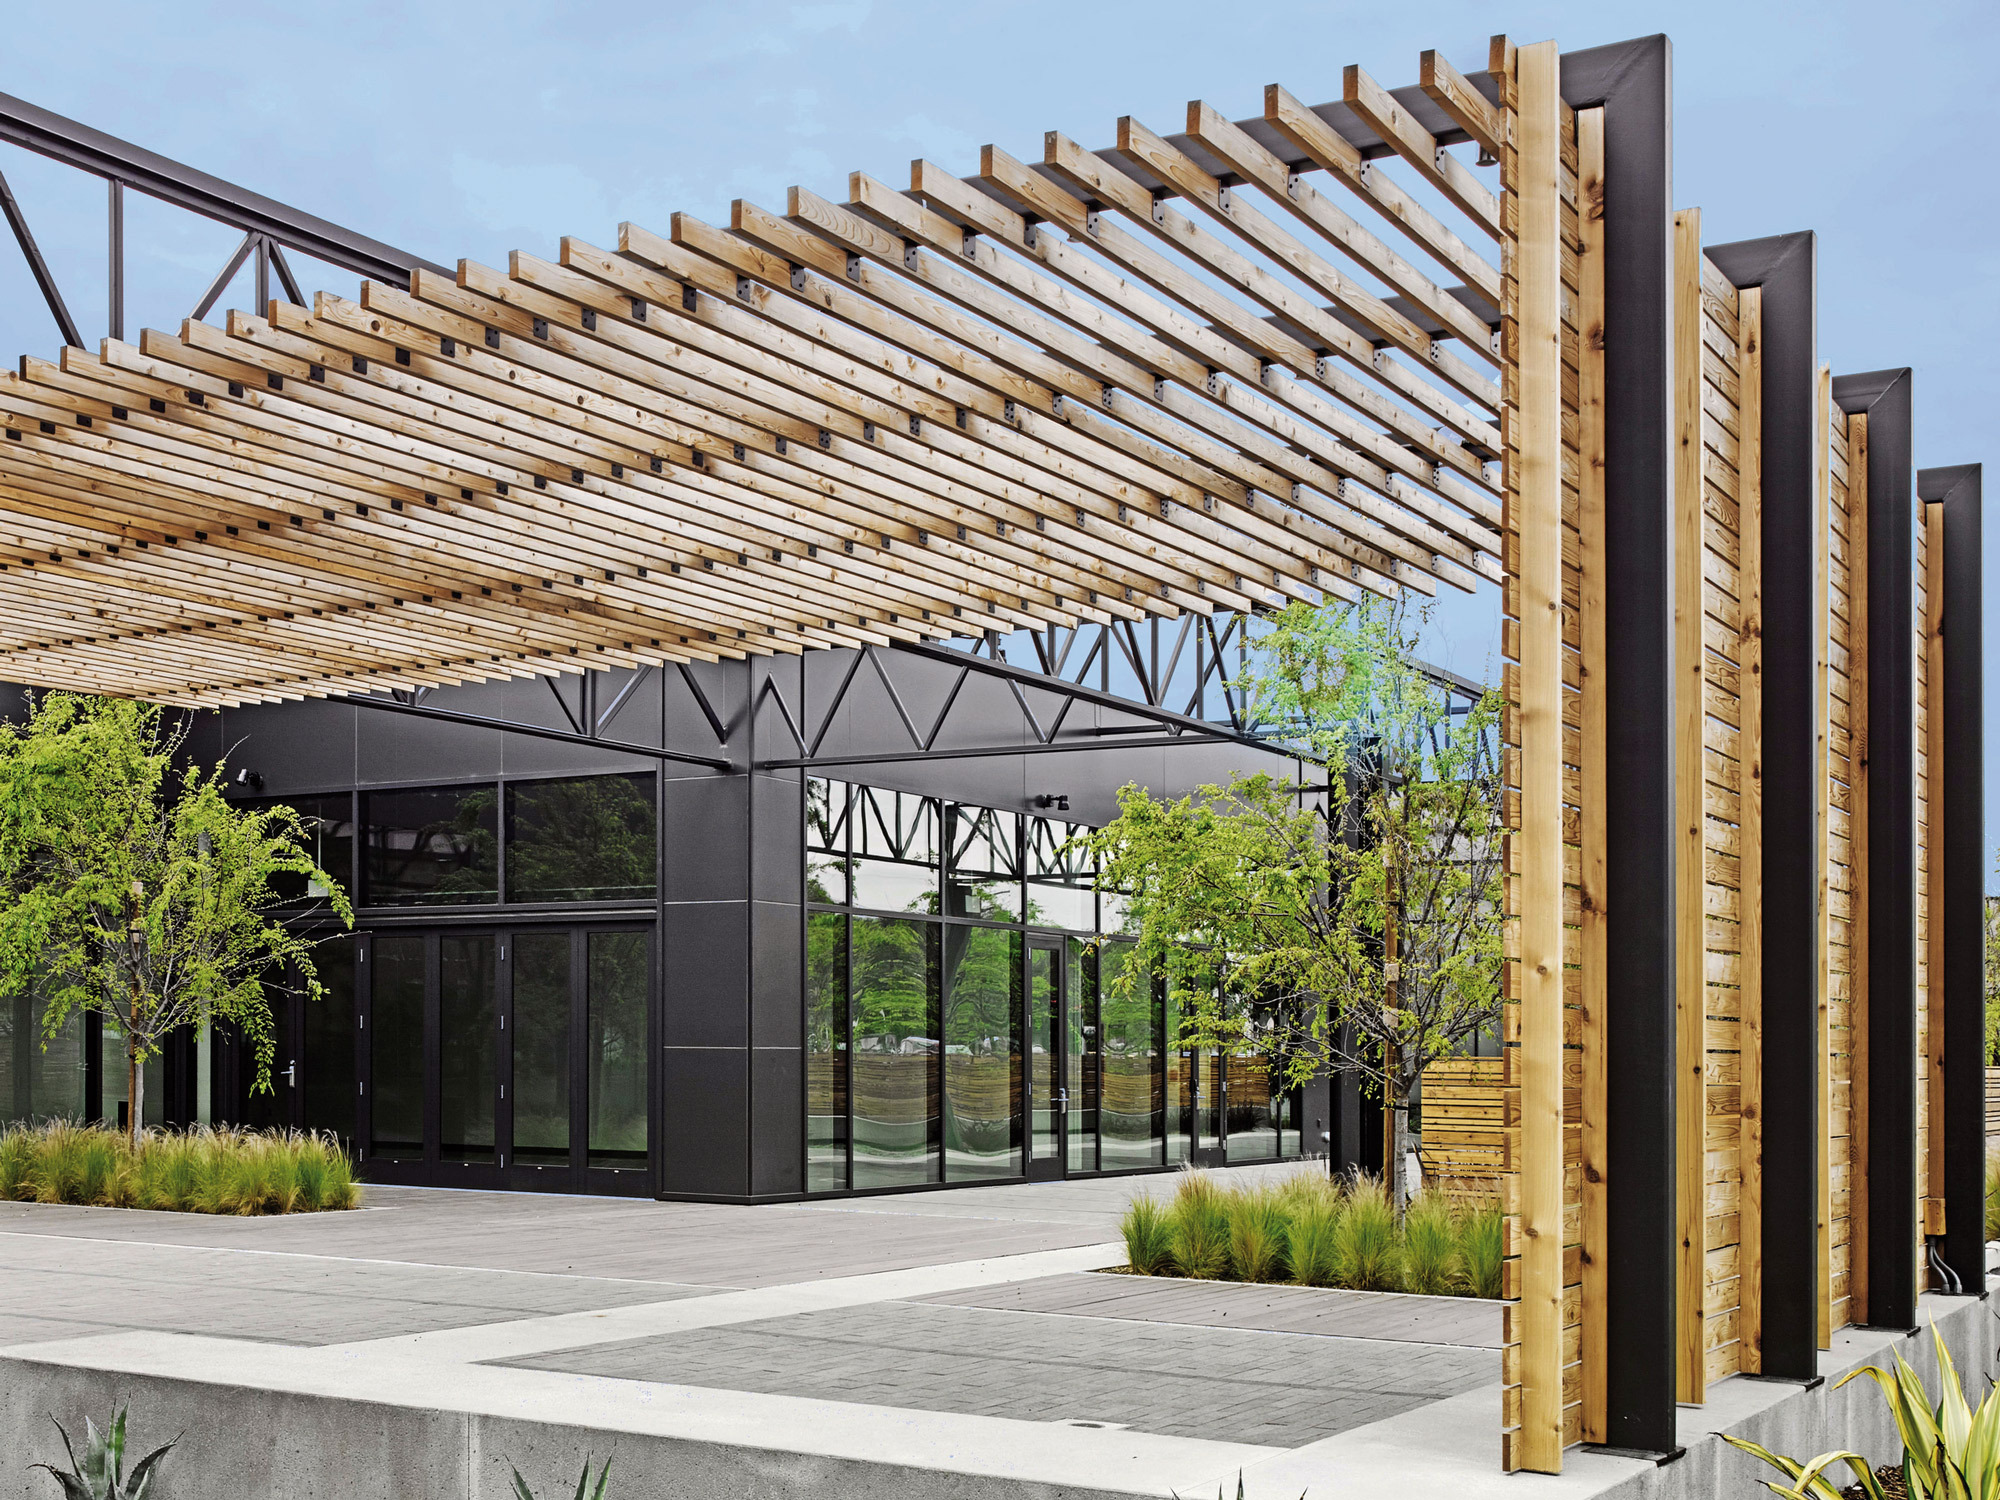 Modern architectural design featuring a series of vertical wooden slats creating a dynamic pergola over an outdoor walkway, contrasted against the sleek, dark glass facade of an office building, surrounded by lush greenery and concrete pathways.